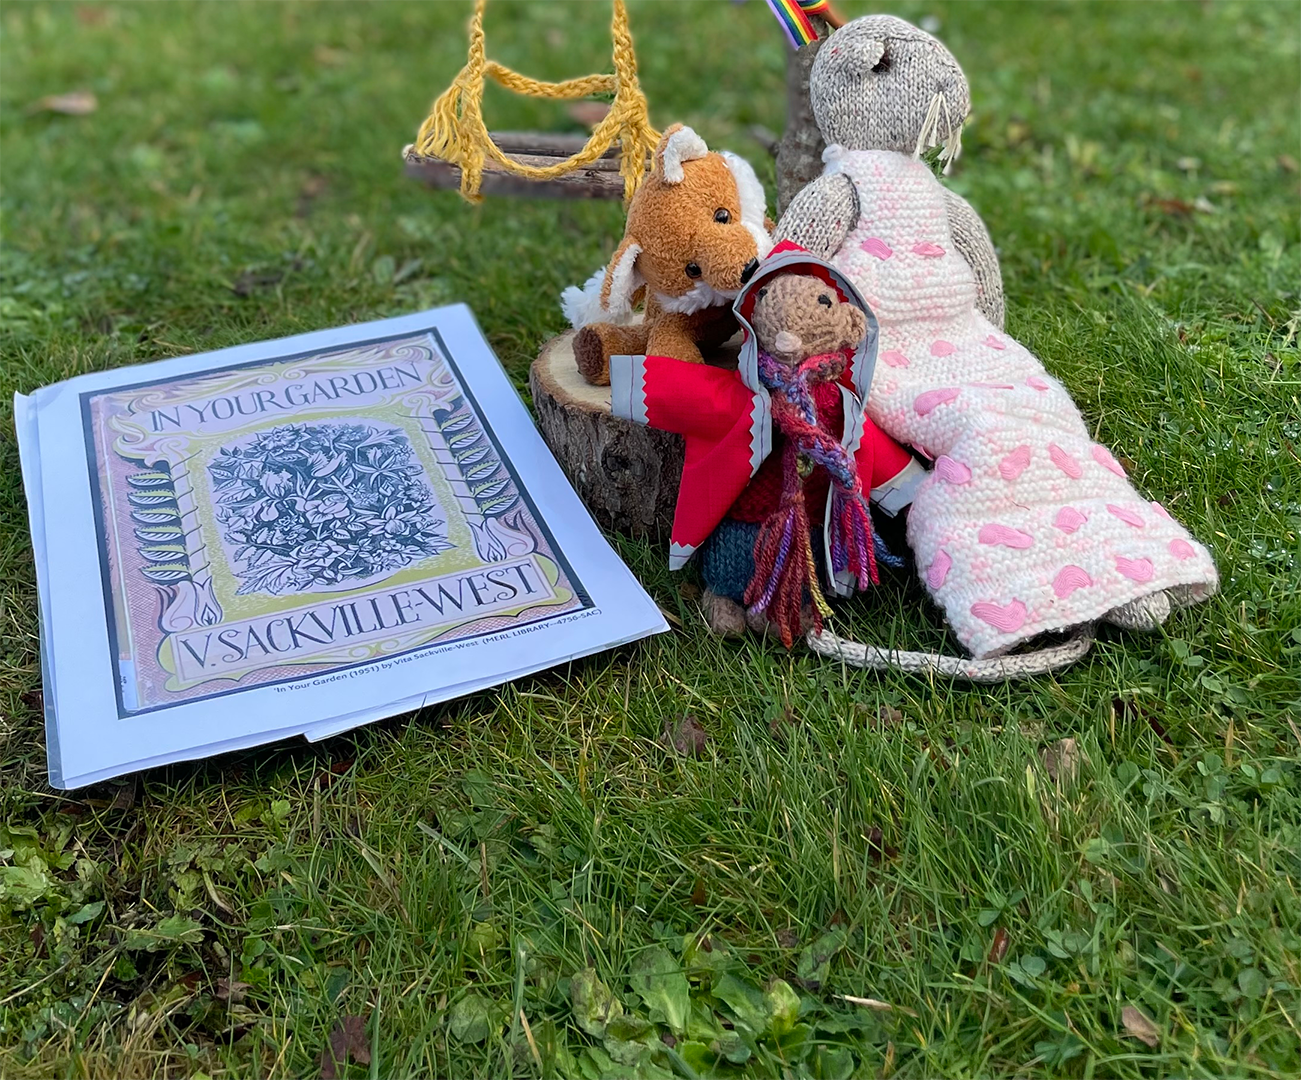 Little Mouse and friends relax in our garden, alongside the cover of Vita Sackville-West's beautiful 'In your Garden'!